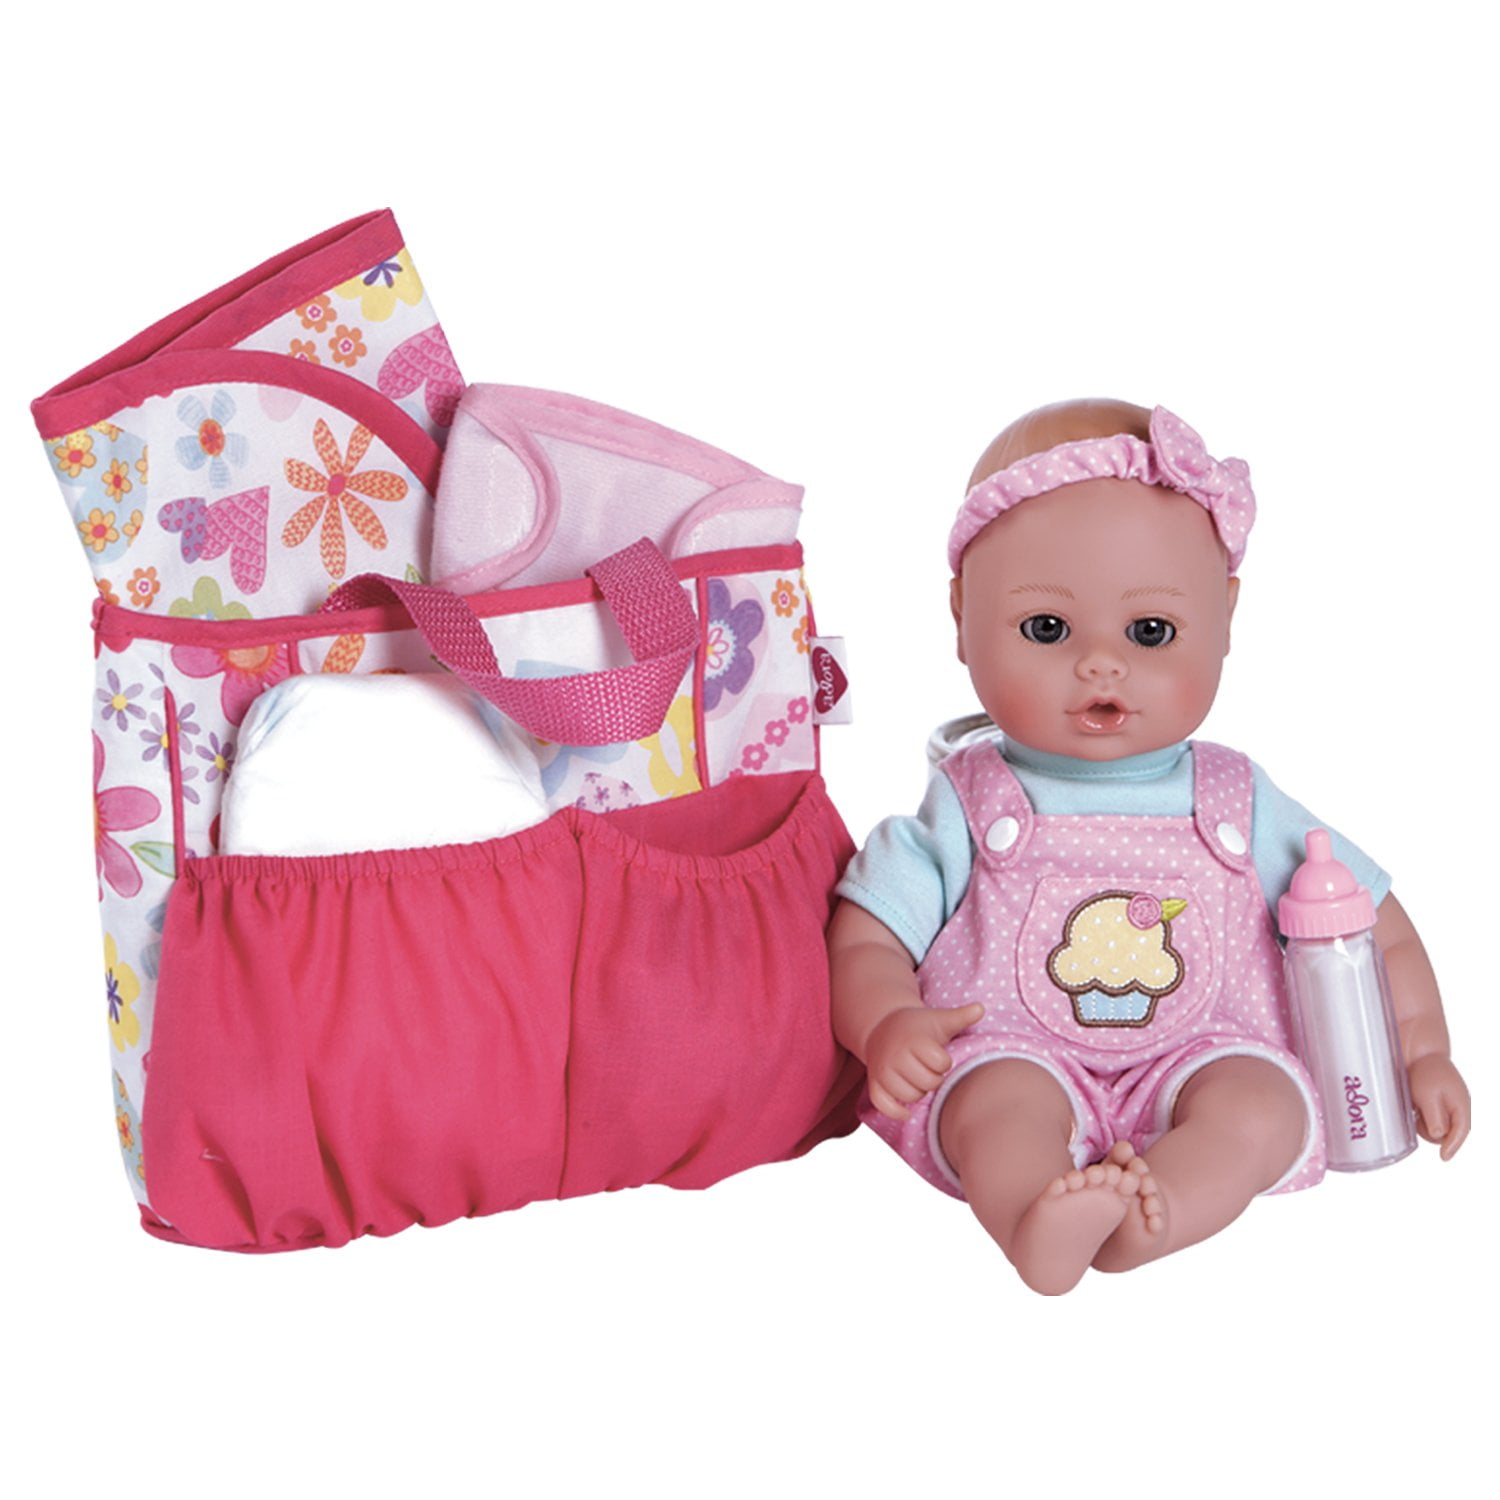 Adora Baby Doll Diaper Bag Accessories With 5-Piece Changing Set | Walmart Canada